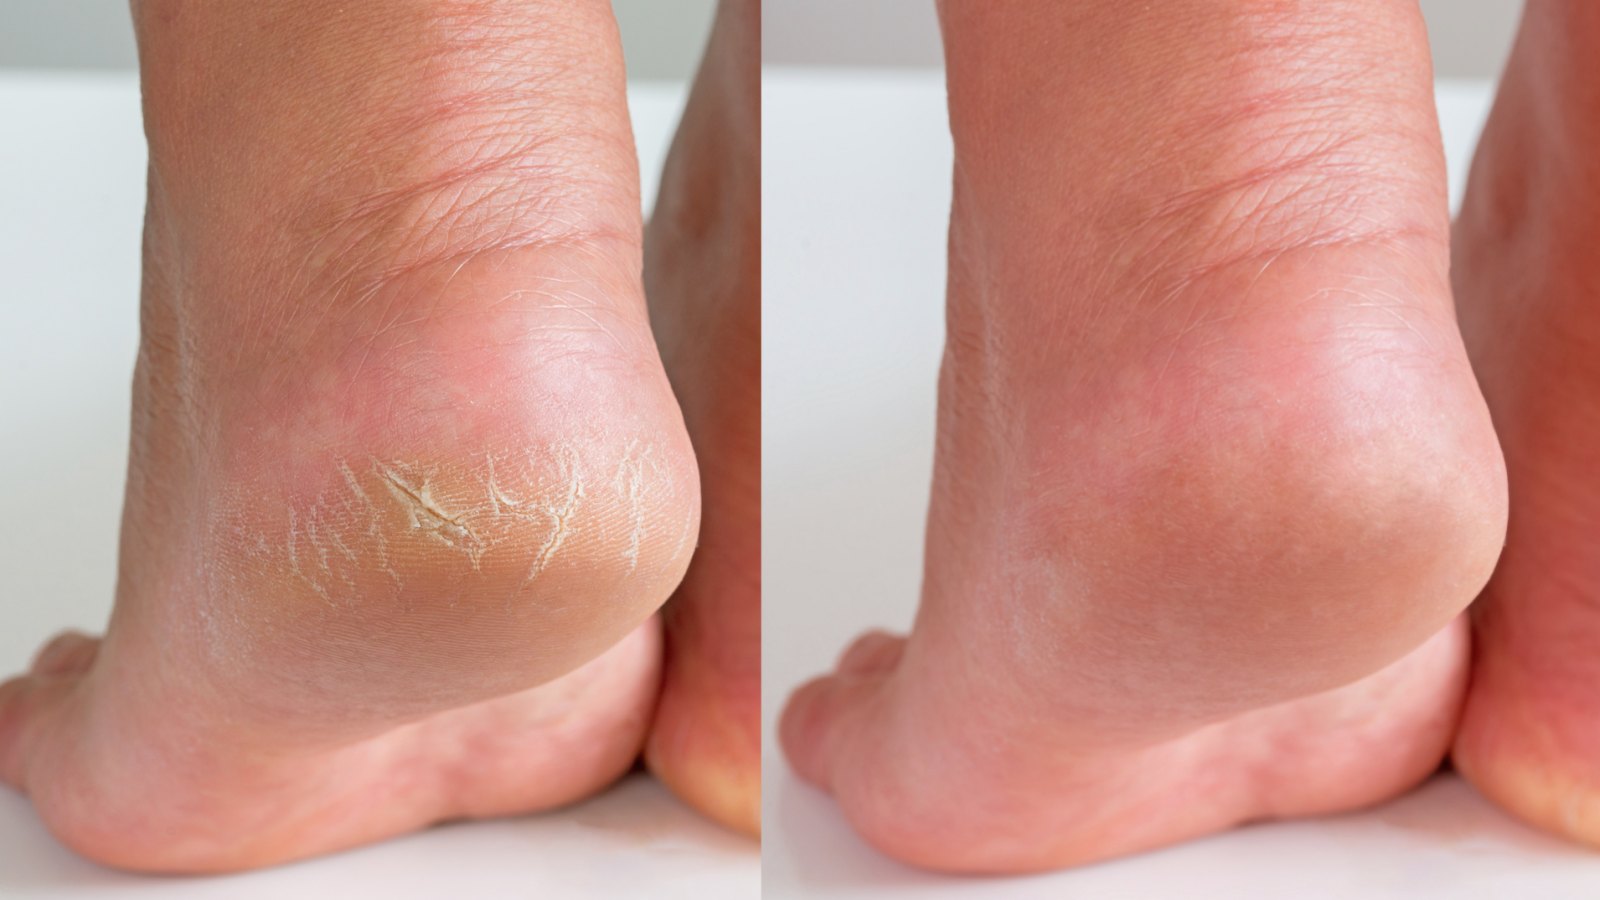 OLD DRY SKIN AND CRACKED HEEL REMOVAL BY MISS FOOT FIXER 